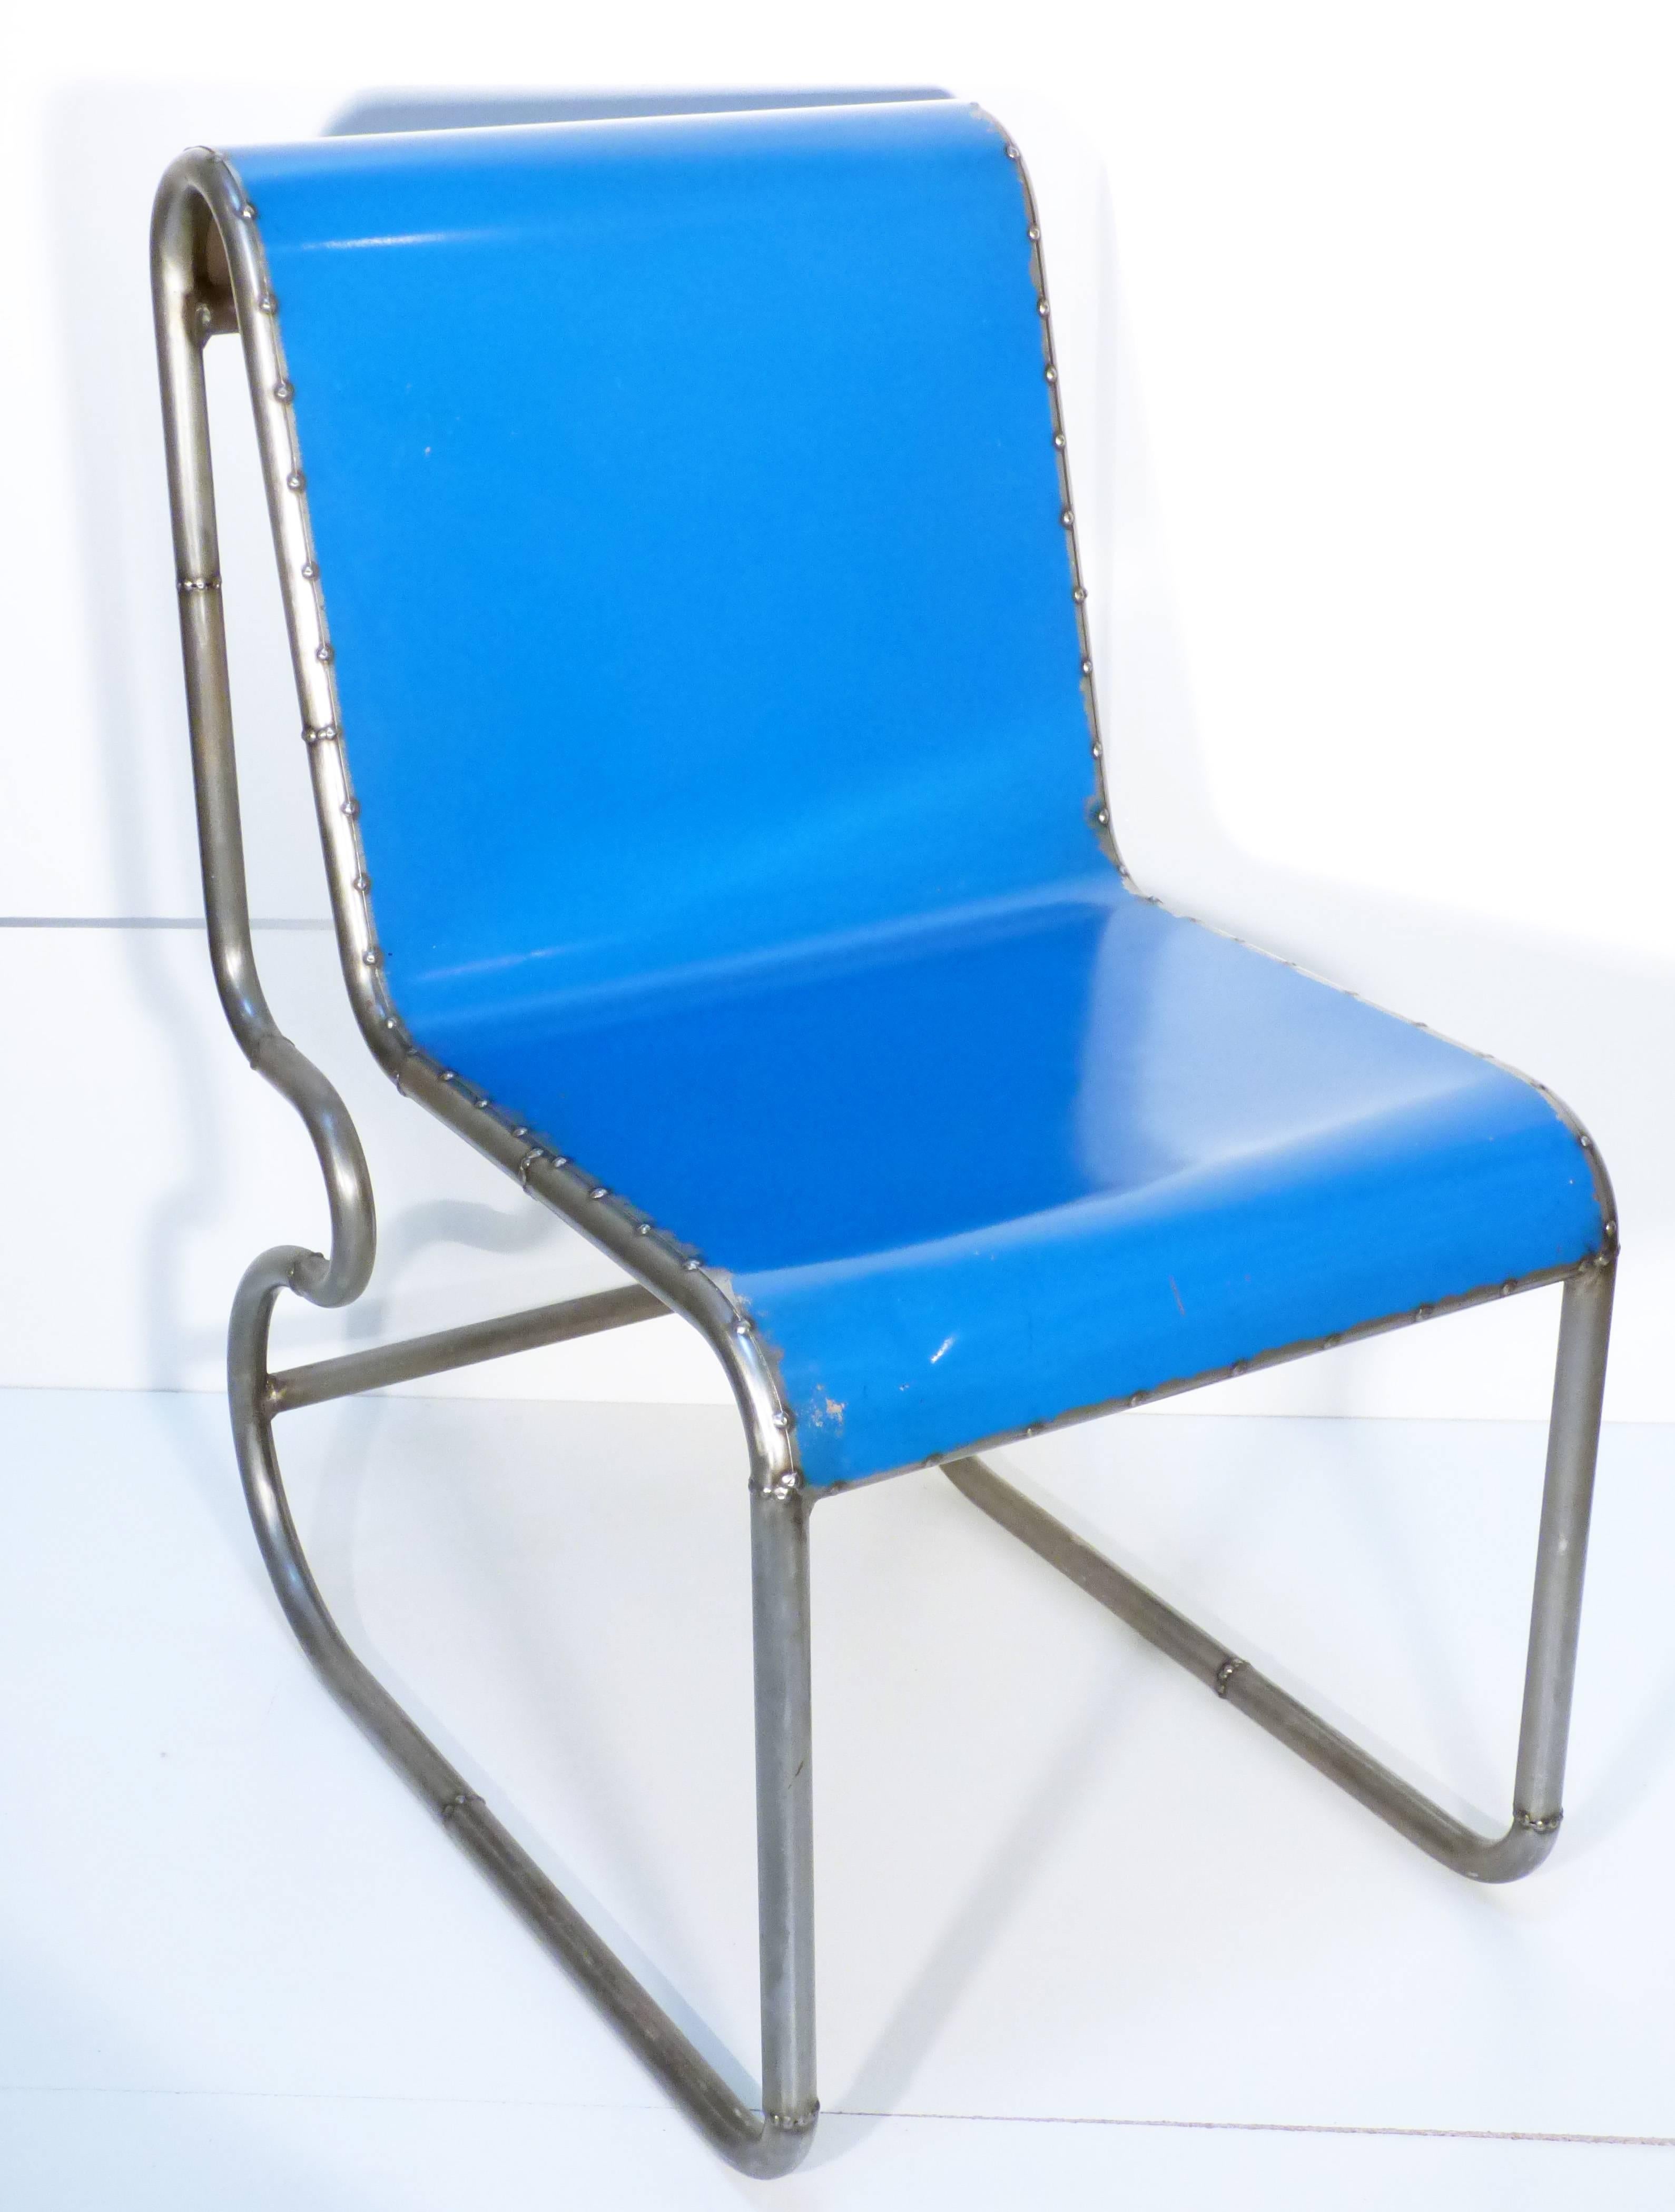 Mid-20th Century American Reclaimed Steel Blue Chair in Industrial Design, Office or Desk Chair  For Sale